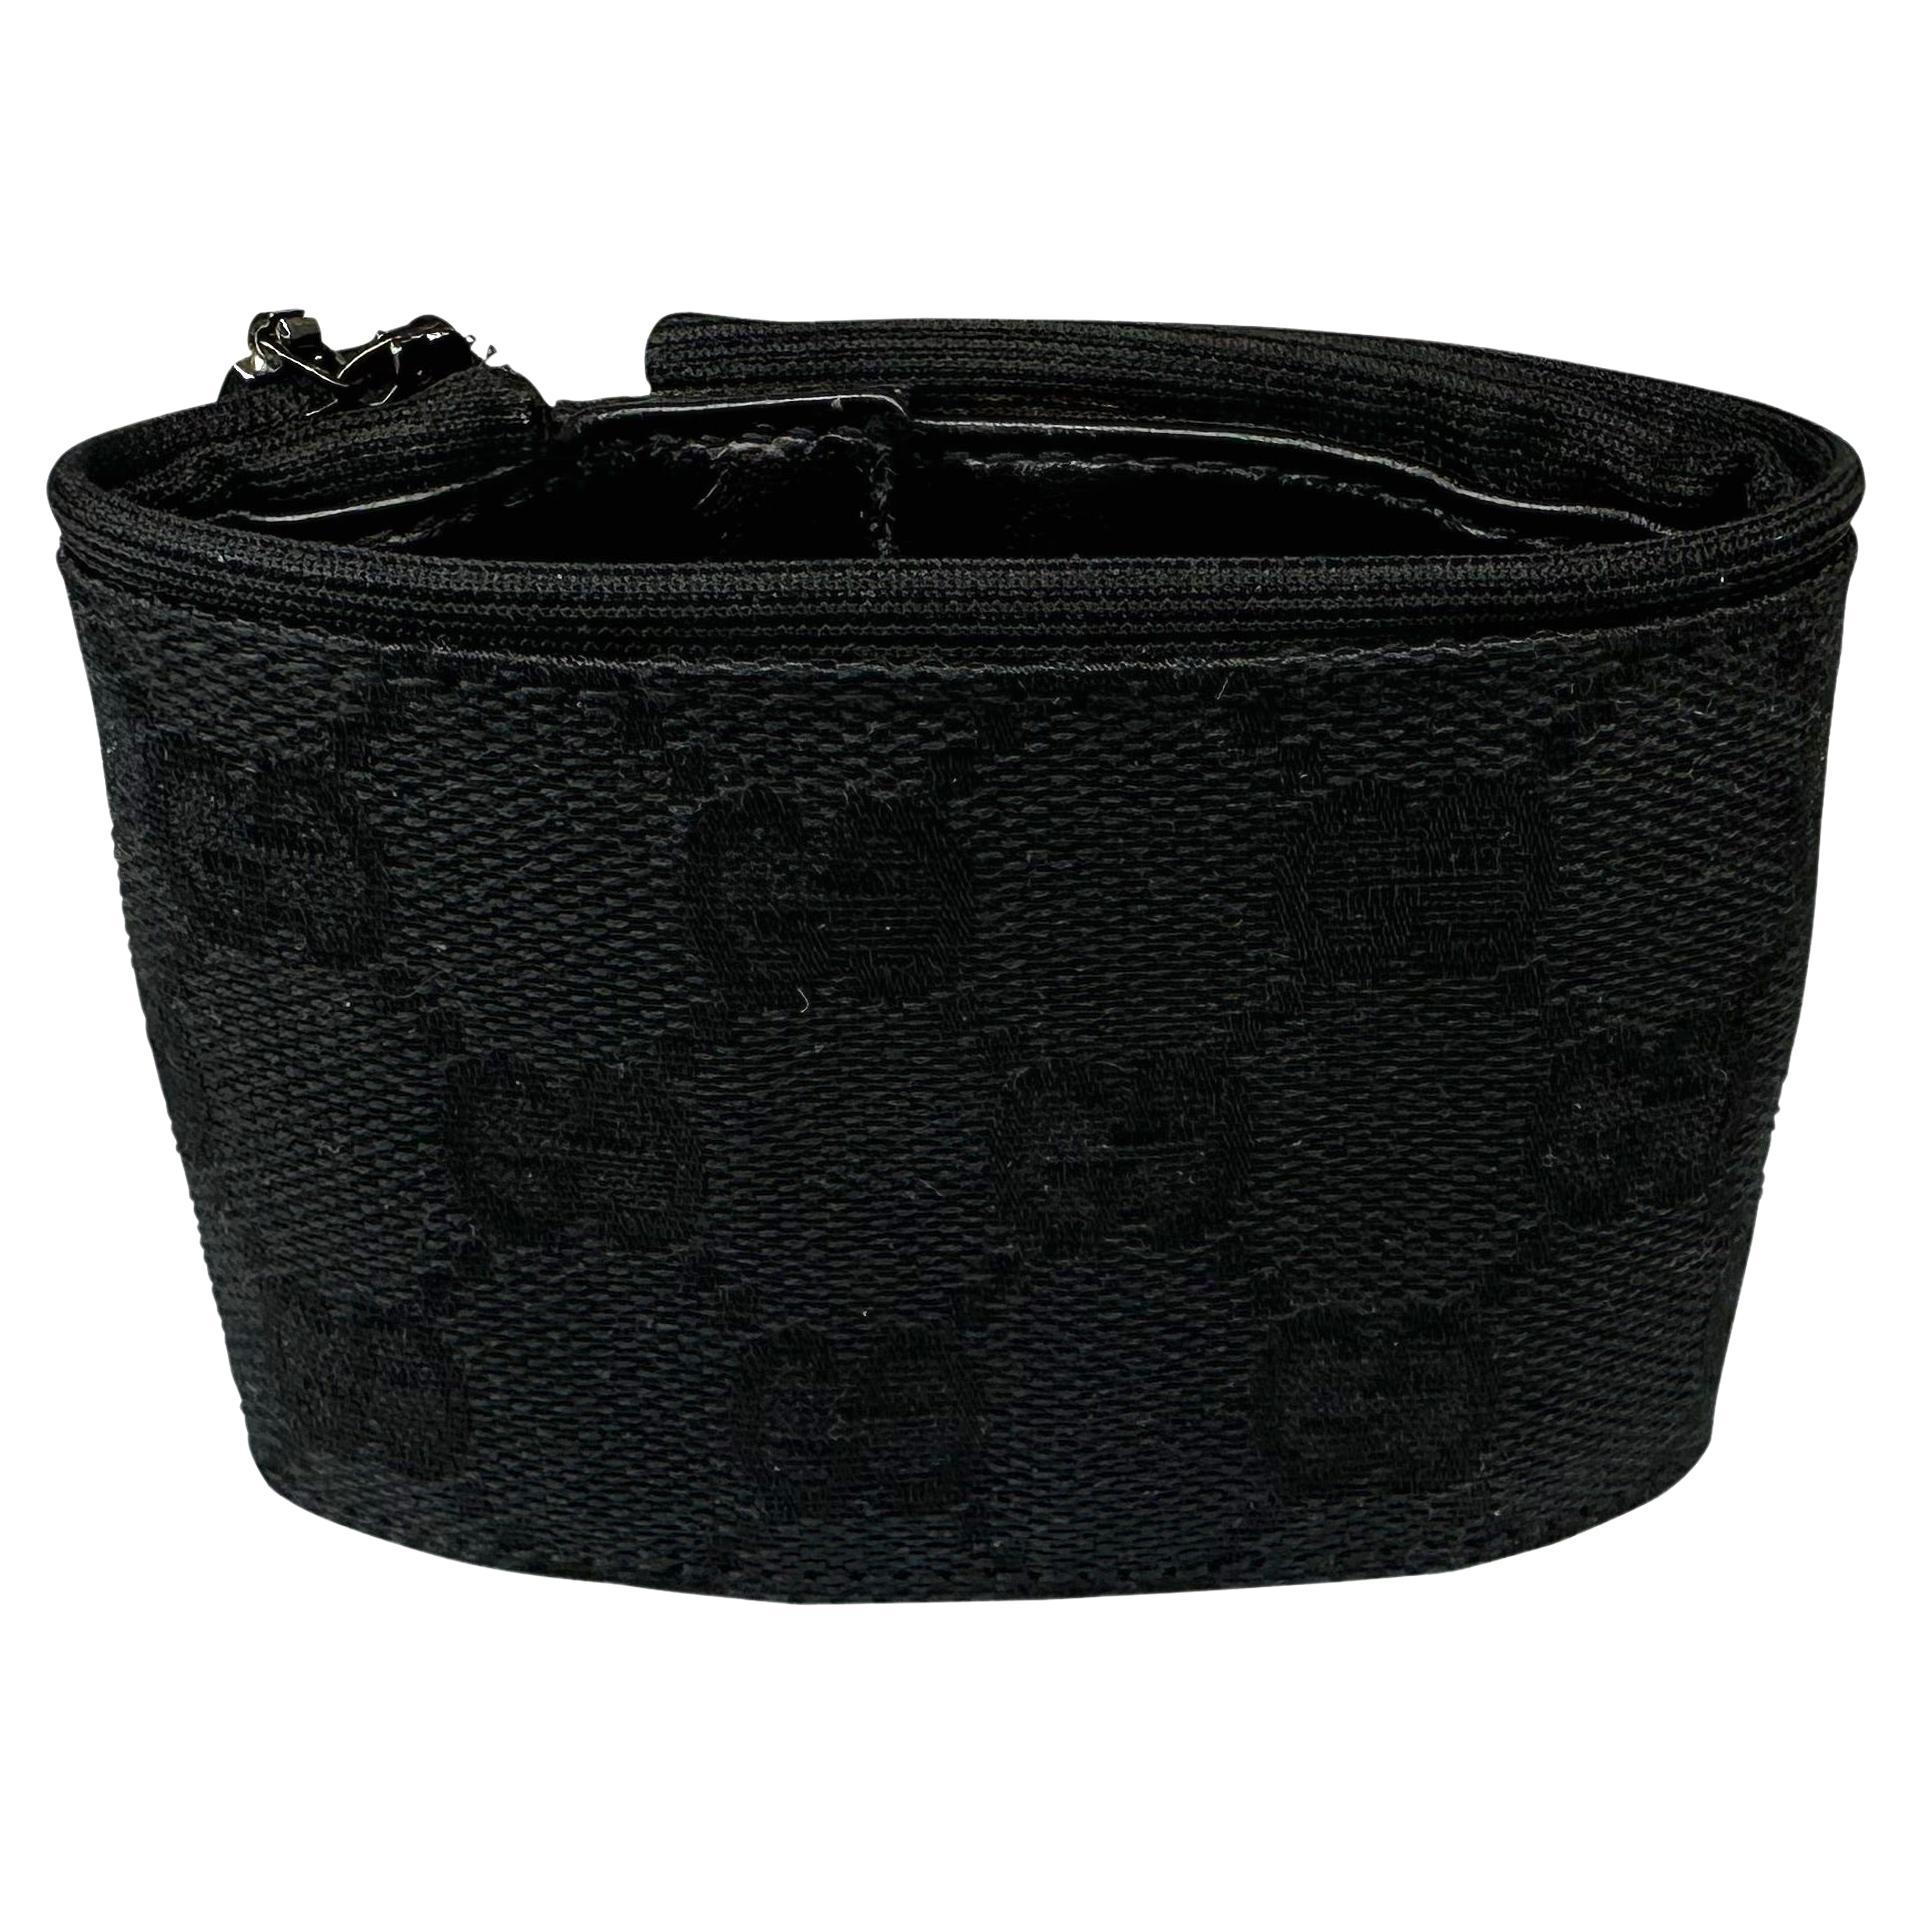 2000s Gucci by Tom Ford Black 'GG' Monogram Wrap Pouch Bracelet For Sale